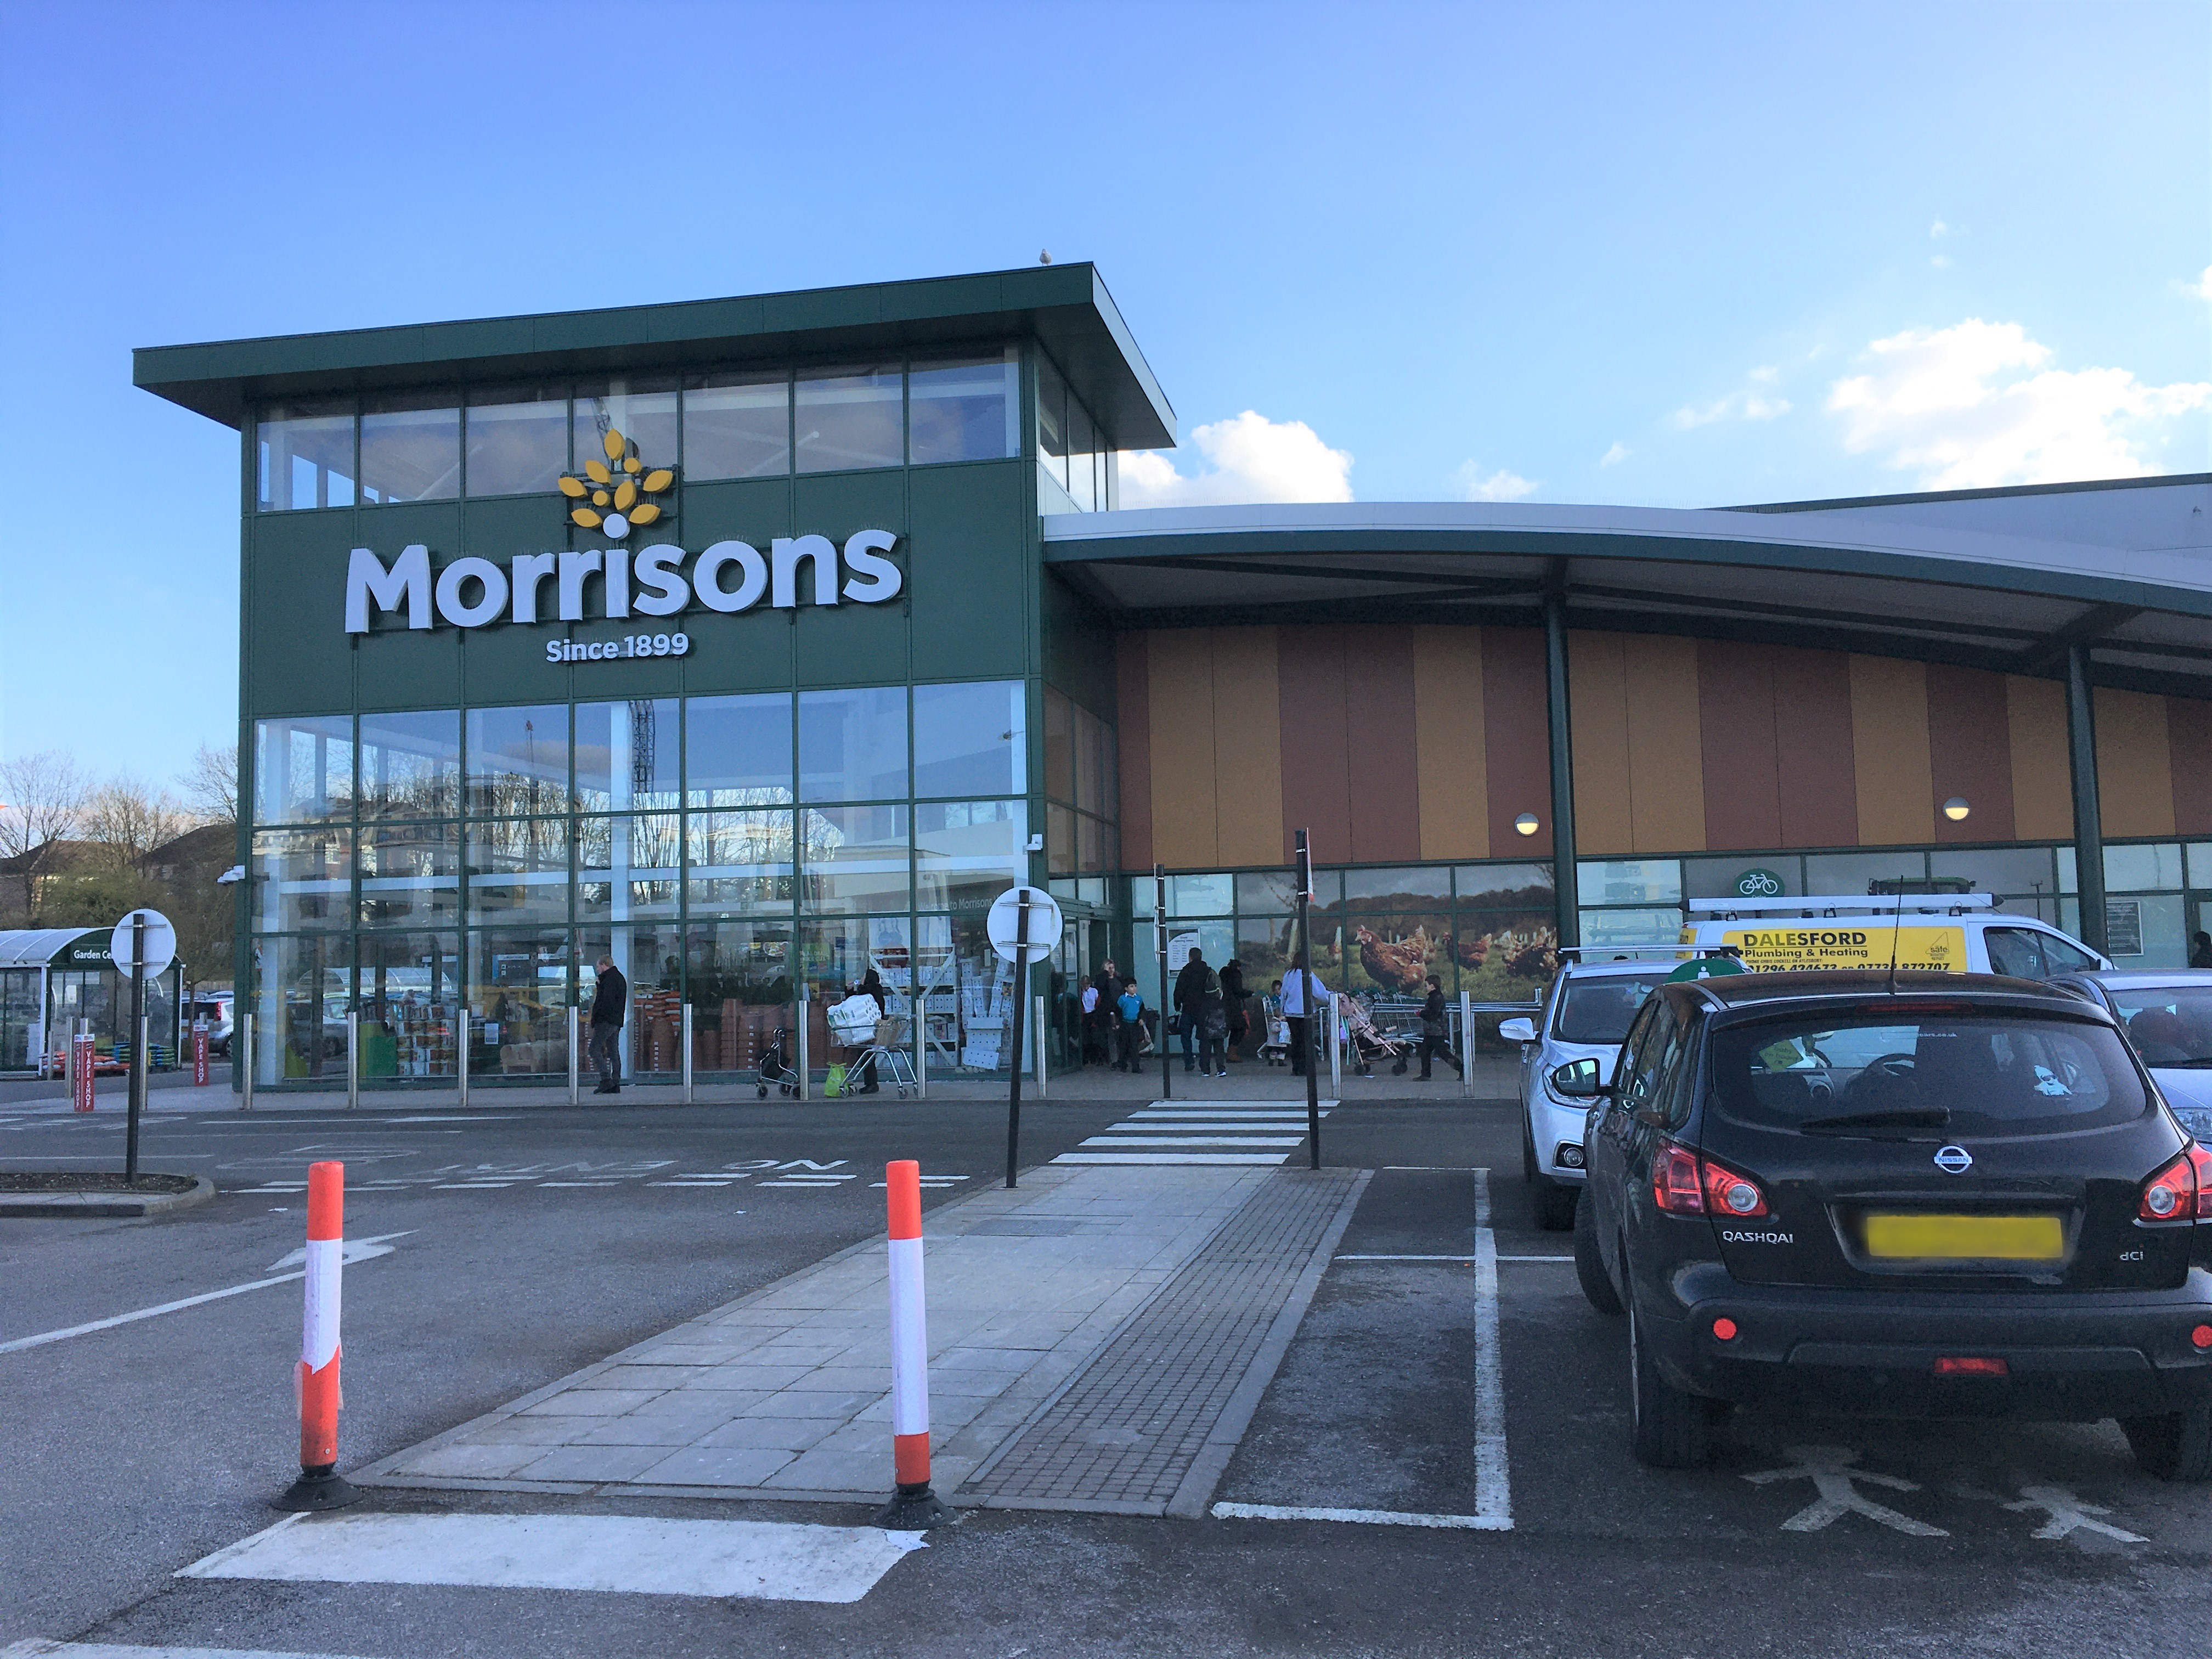 COVID-19 stockpiling essential items Morrisons Watford where public stockpiling was investigated